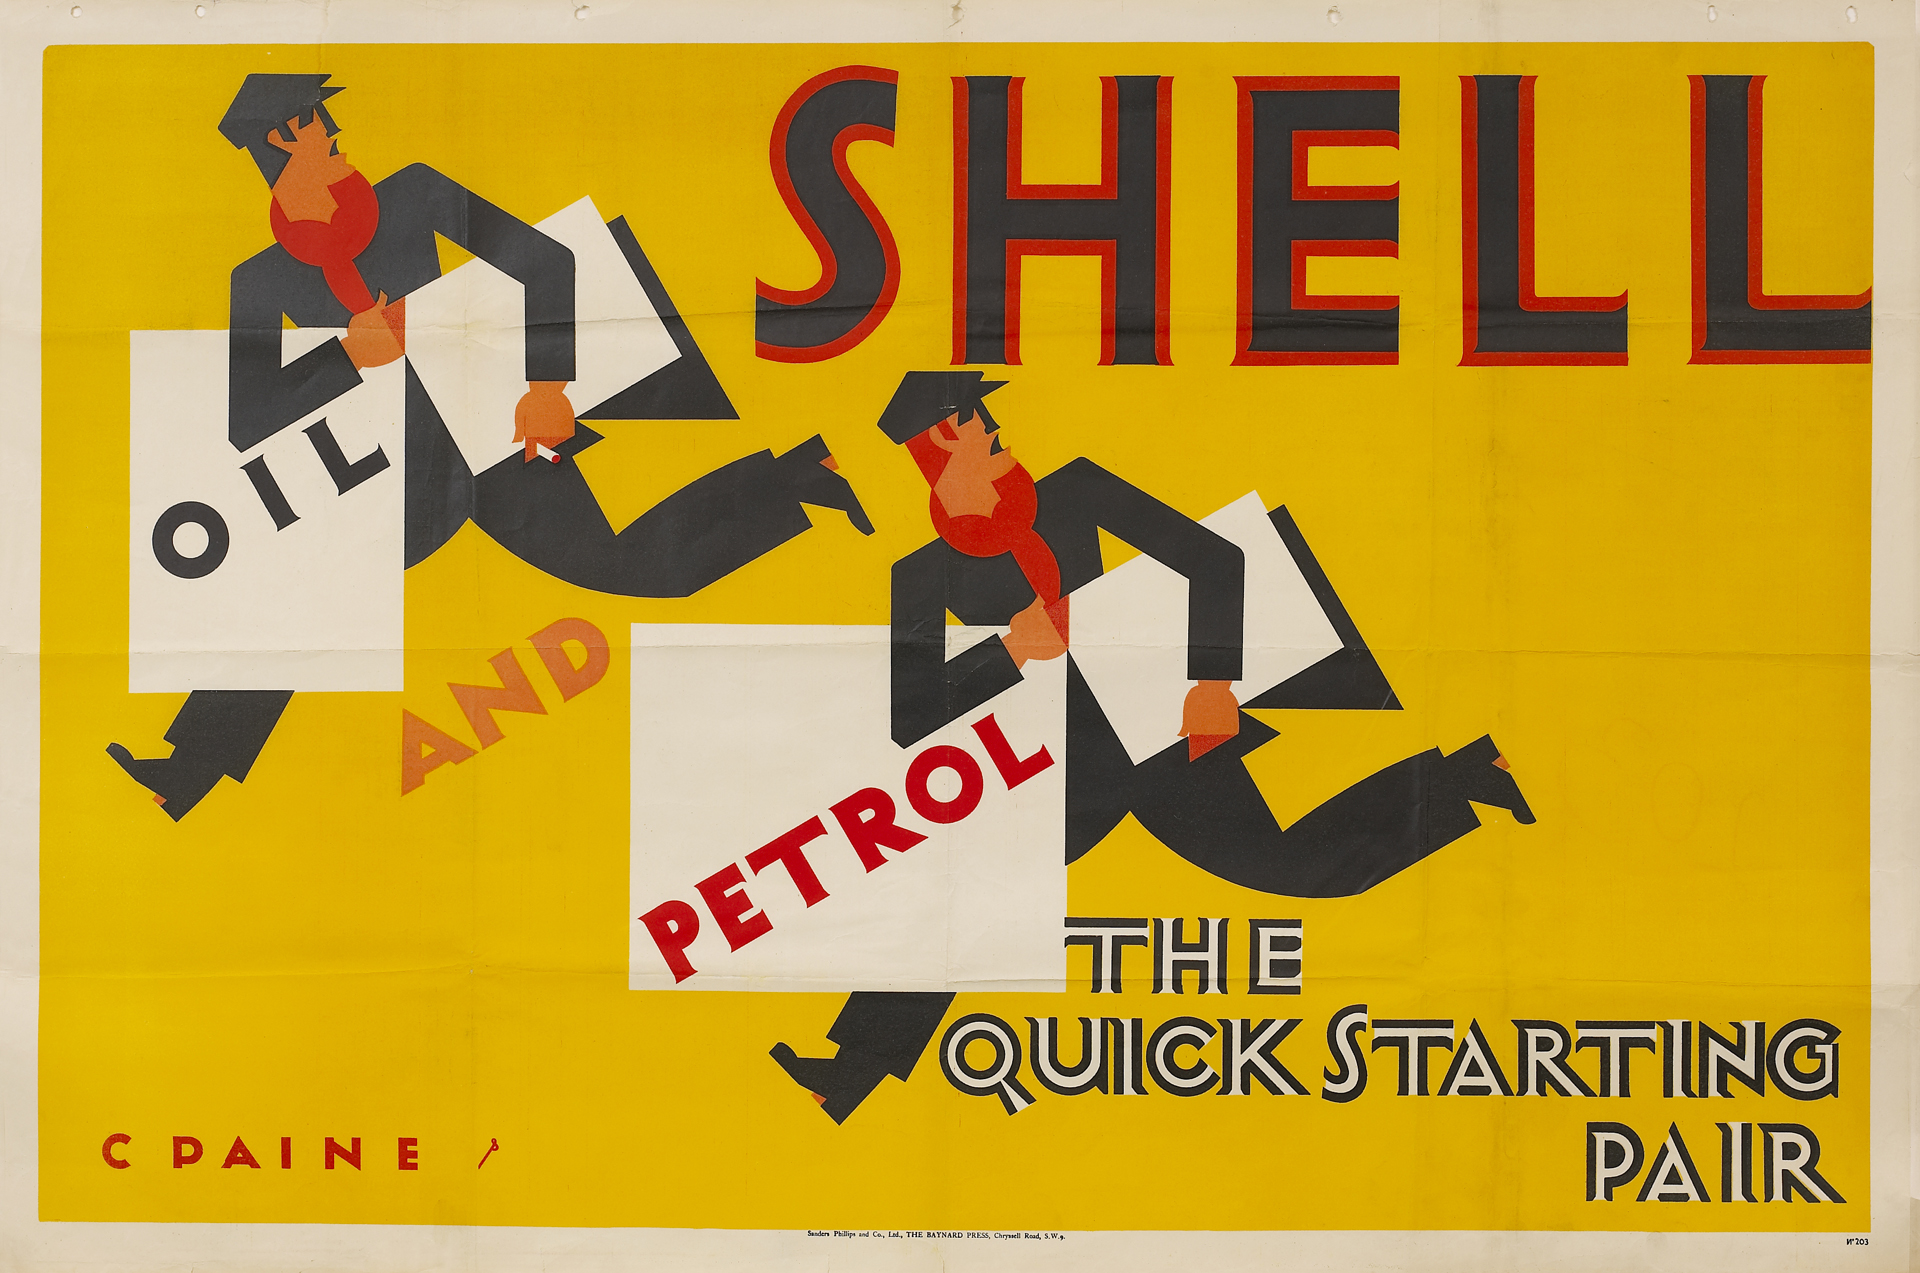 Poster of The Quick Starting Pair - Newsboys by Charles Paine, 1928